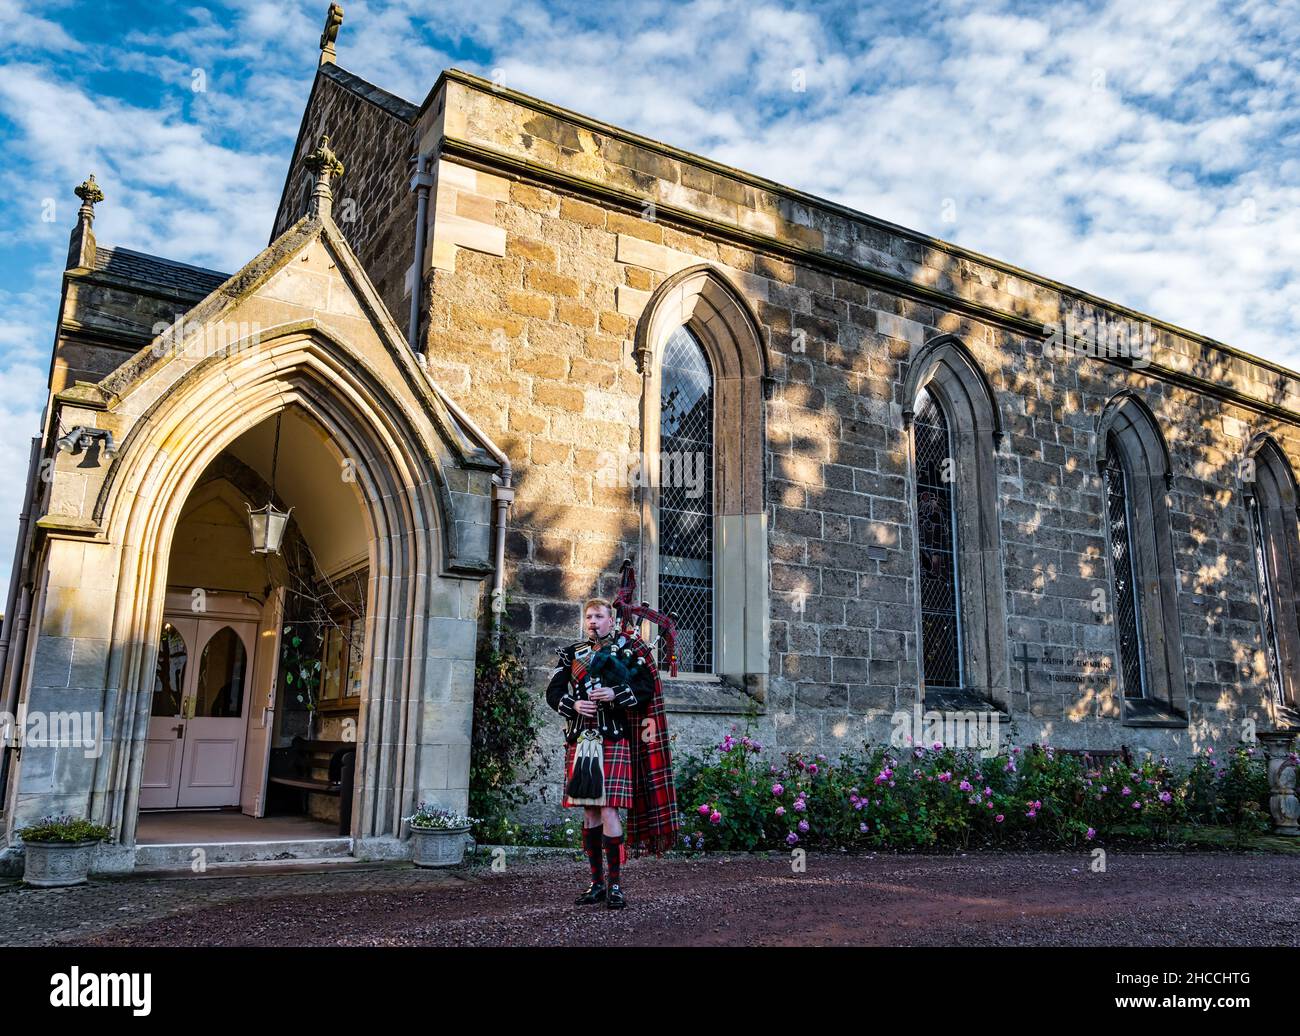 A piper from Scots Guards plays bagpipes outside Holy Trinity Church, Haddington, East Lothian, Scotland, UK Stock Photo